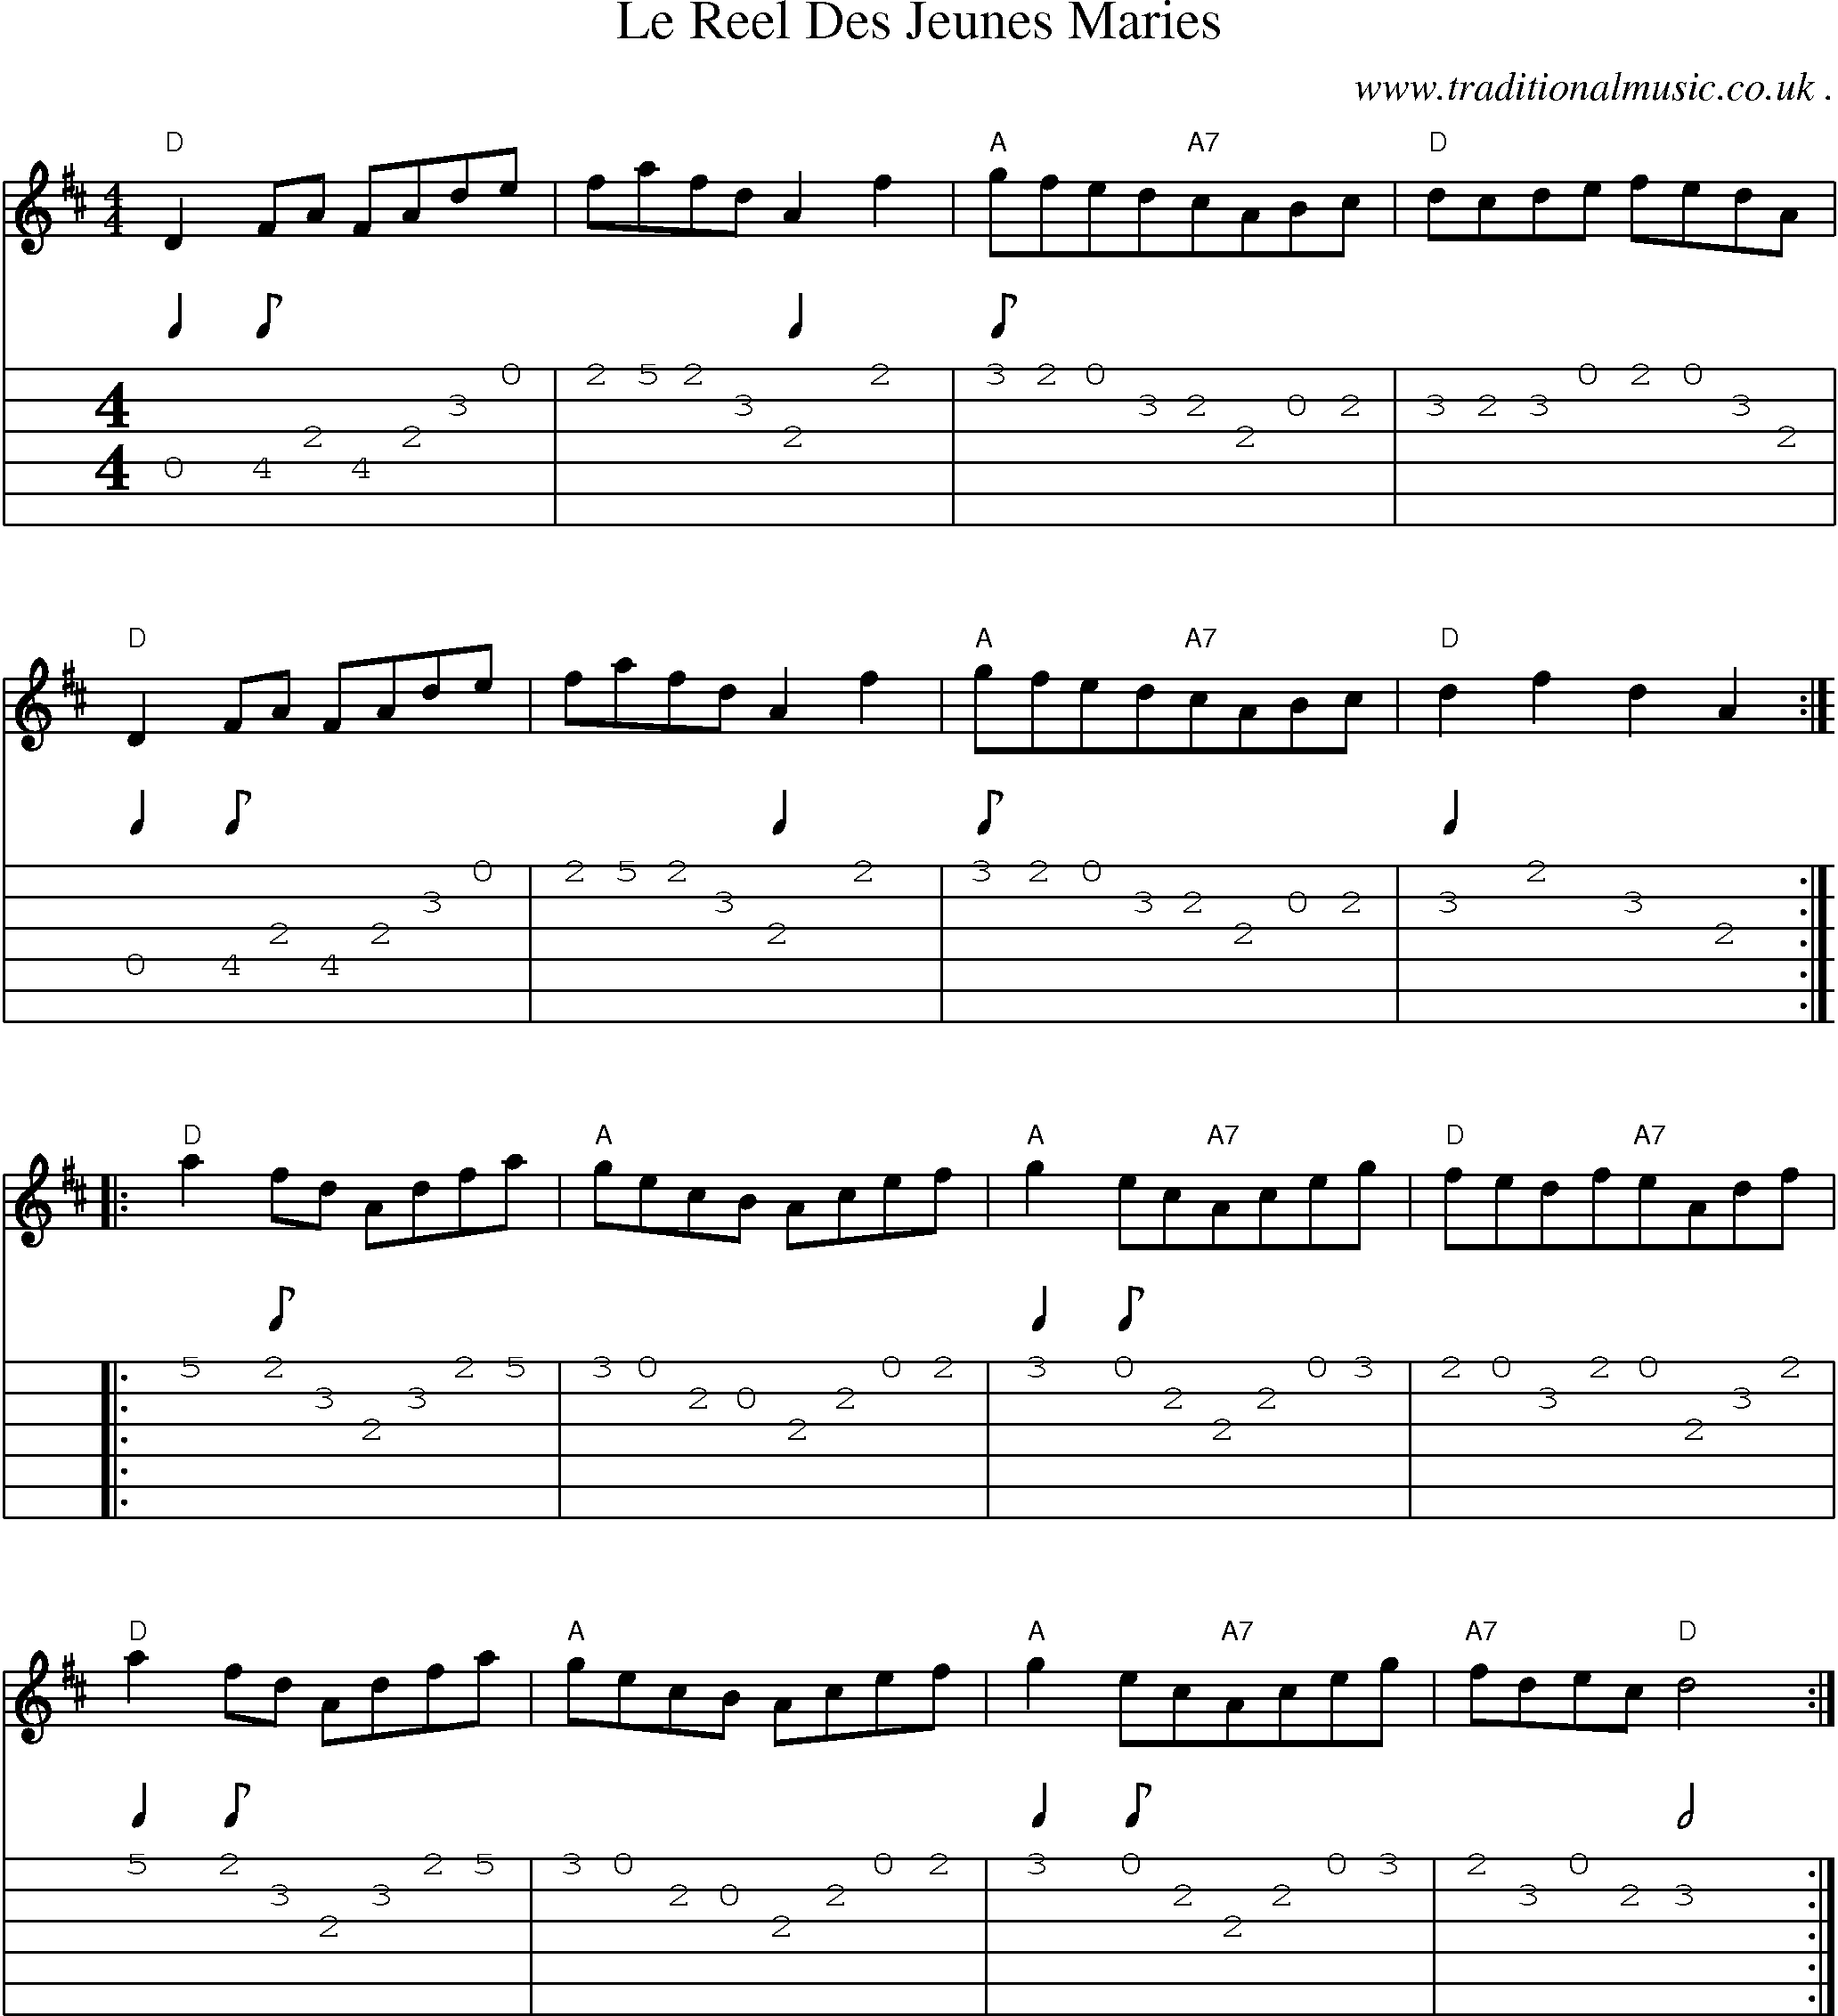 Sheet-Music and Guitar Tabs for Le Reel Des Jeunes Maries